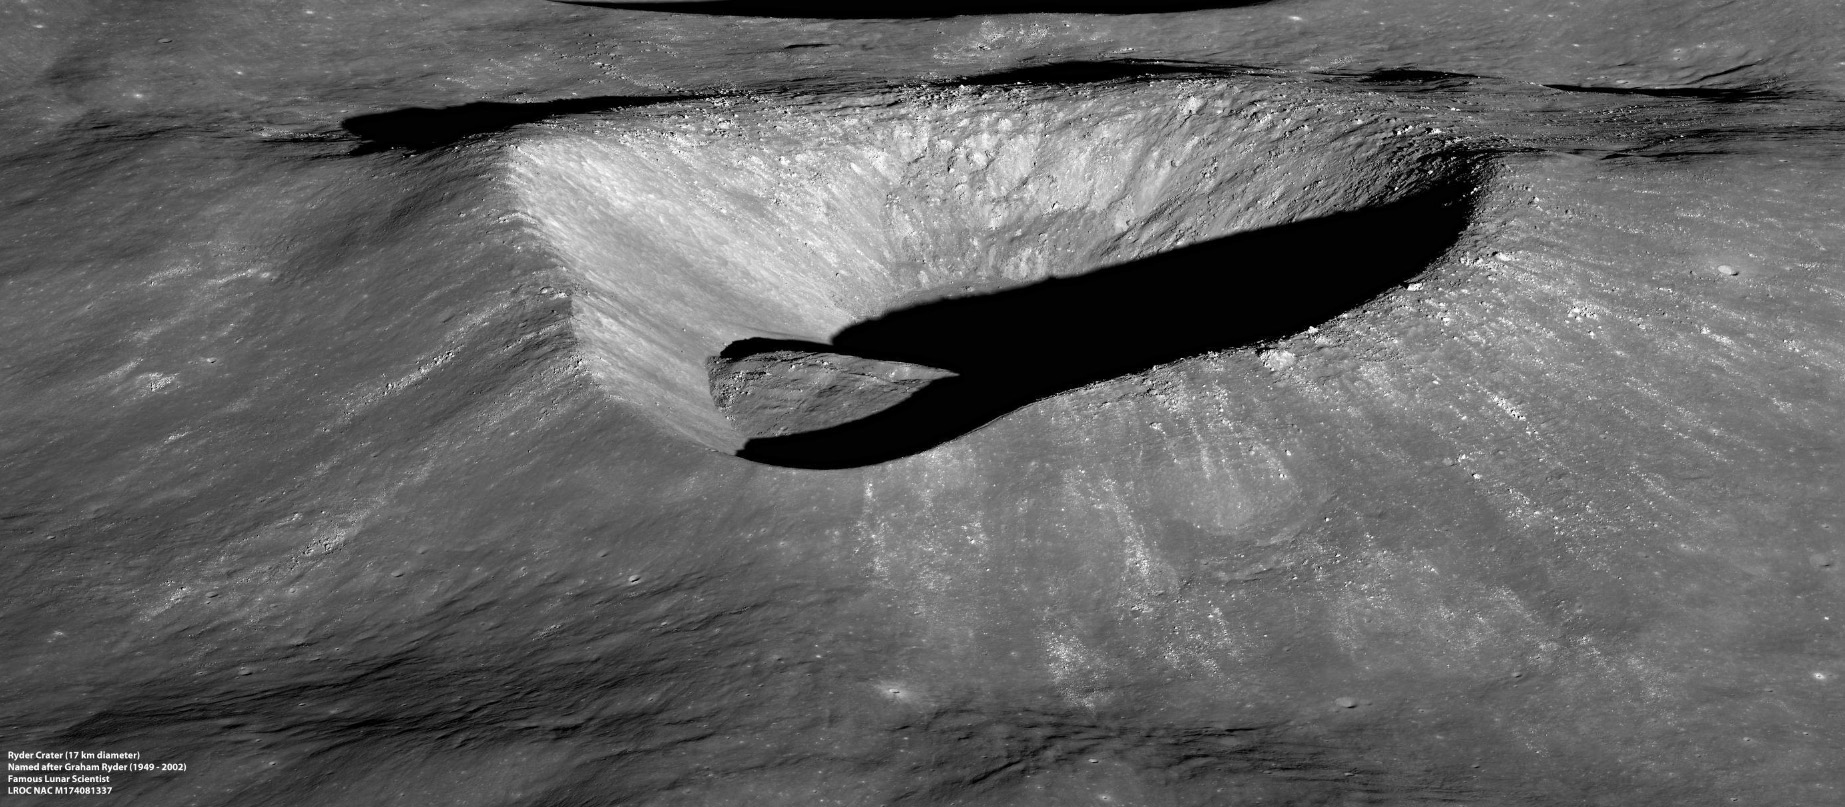 Oblique view of a crater shaped like a rounded triangle, with its edge casting a dramatic shadow inside.